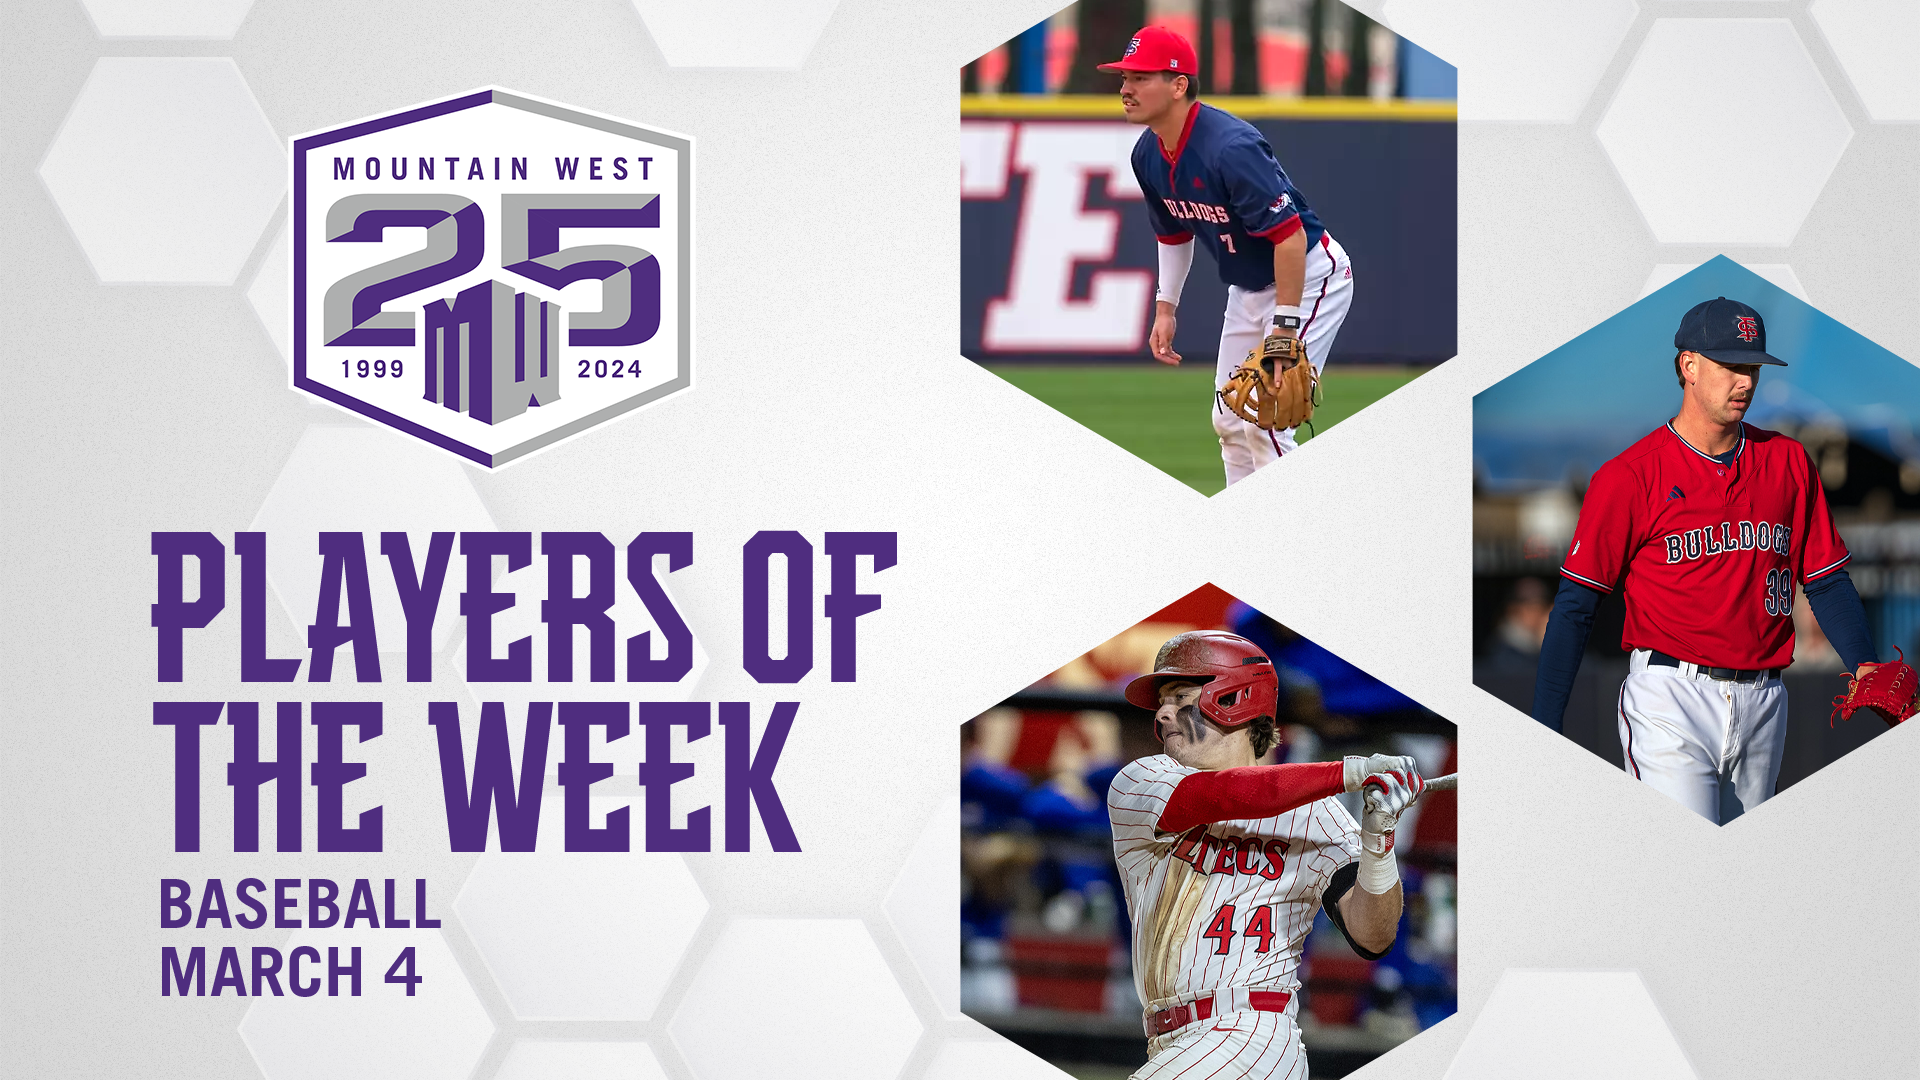 Mountain West Baseball Players of the Week - March 4